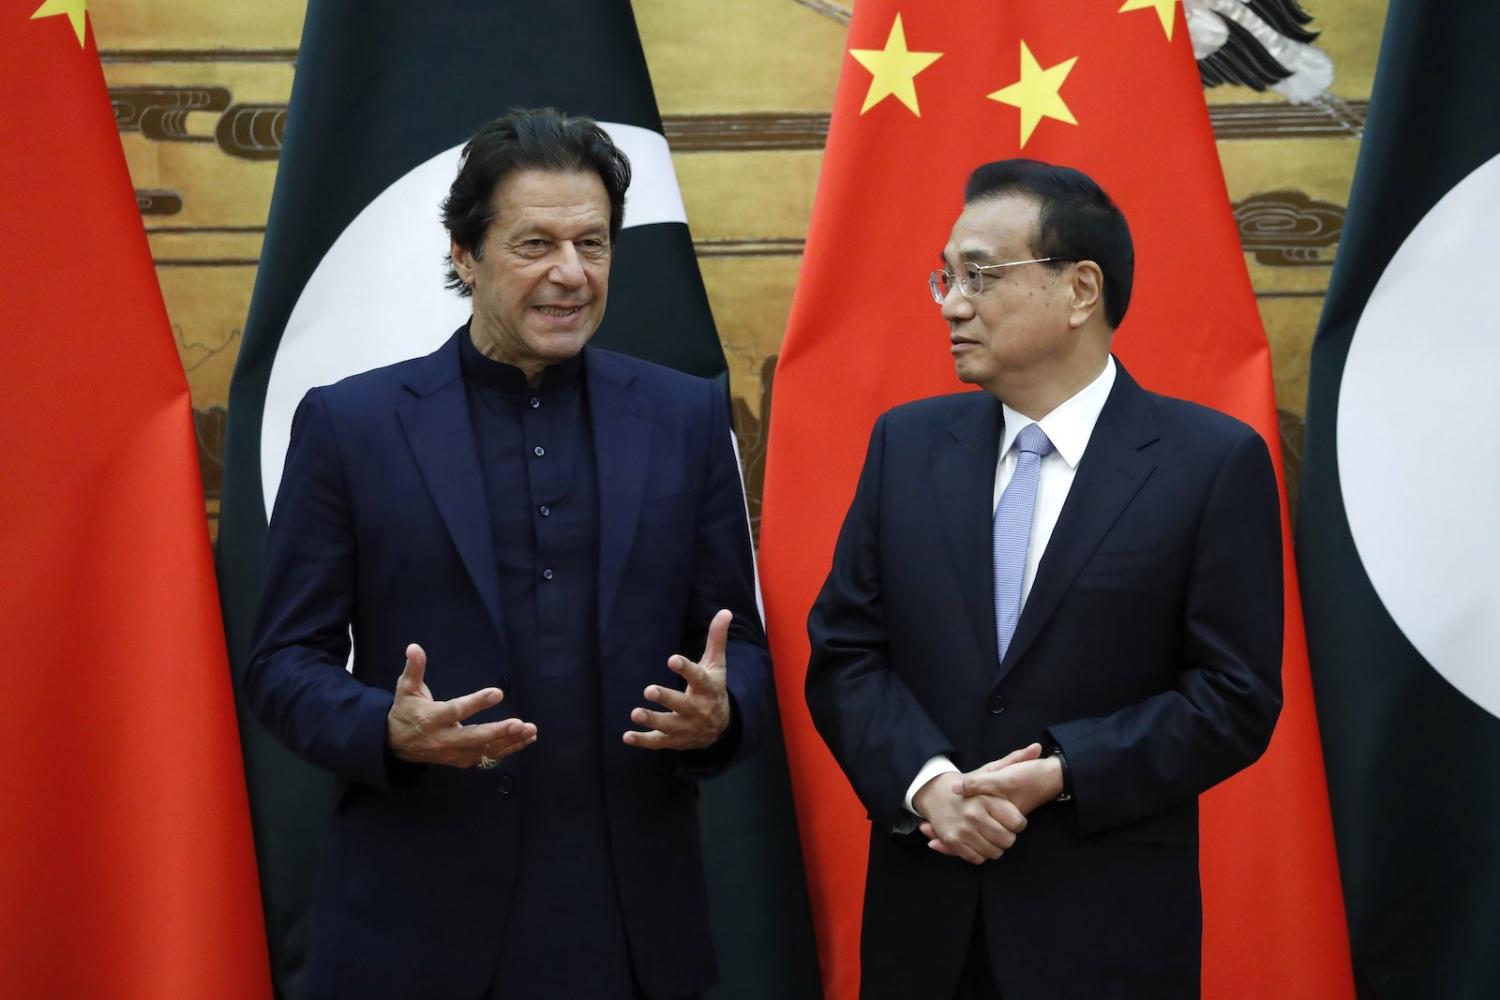 Pakistan’s Prime Minister Imran Khan (L) speaks with Chinese Premier Li Keqiang at the Great Hall of the People in Beijing, 8 October 2019 (Yukie Nishizawa/Pool/Getty Images)